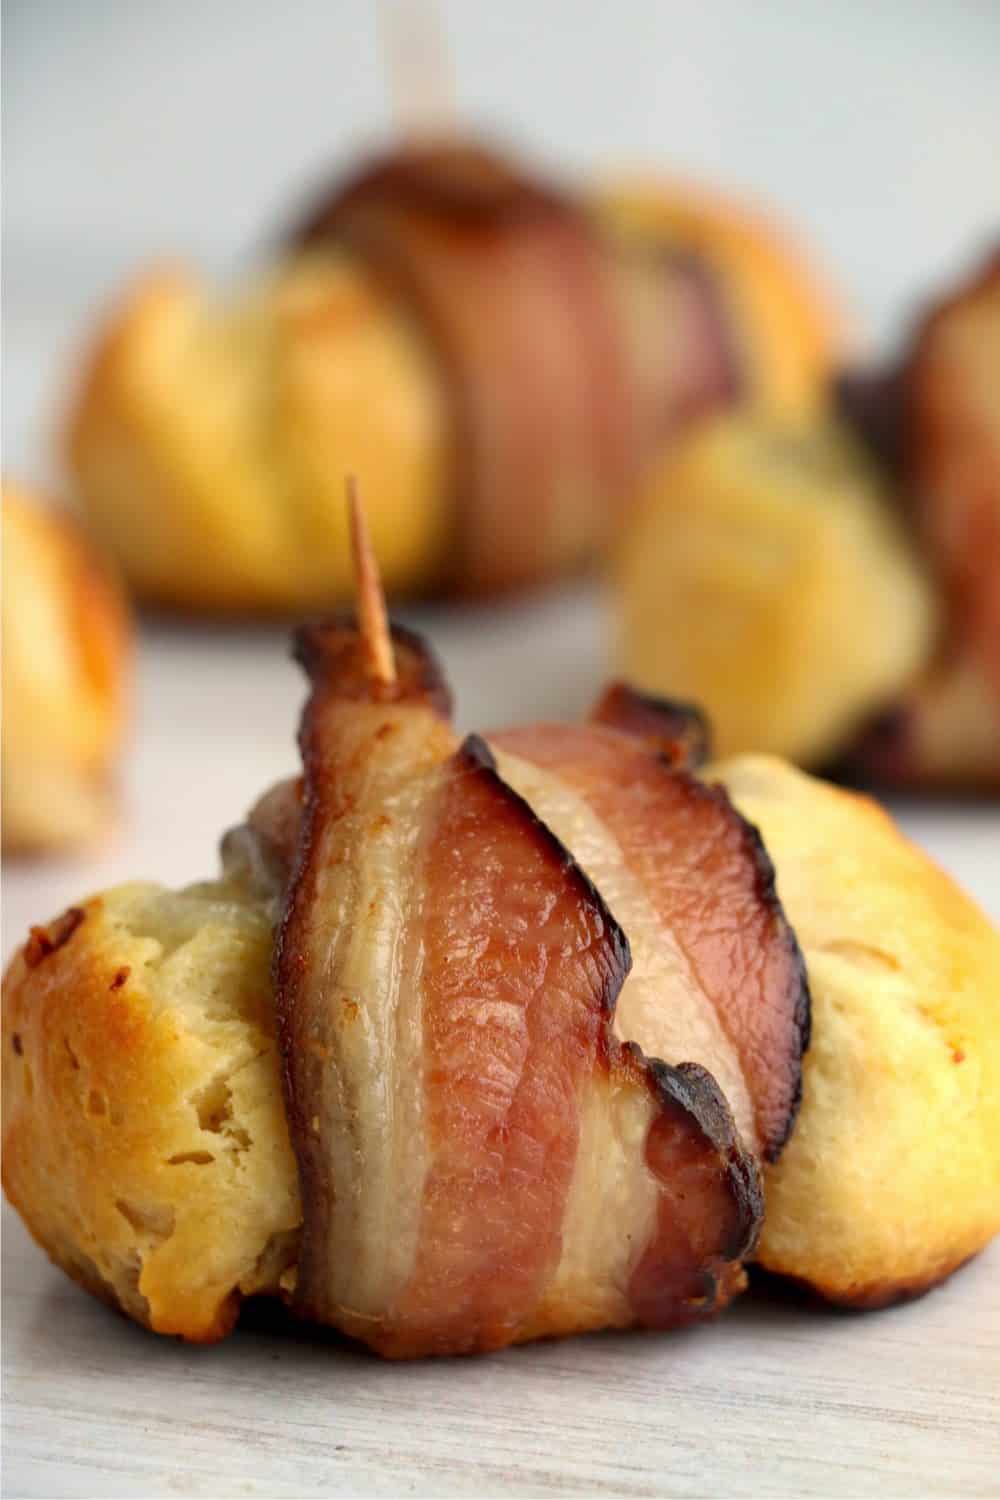 A close-up vertical photograph of a bacon wrapped cheese bomb with a toothpick sticking out the top